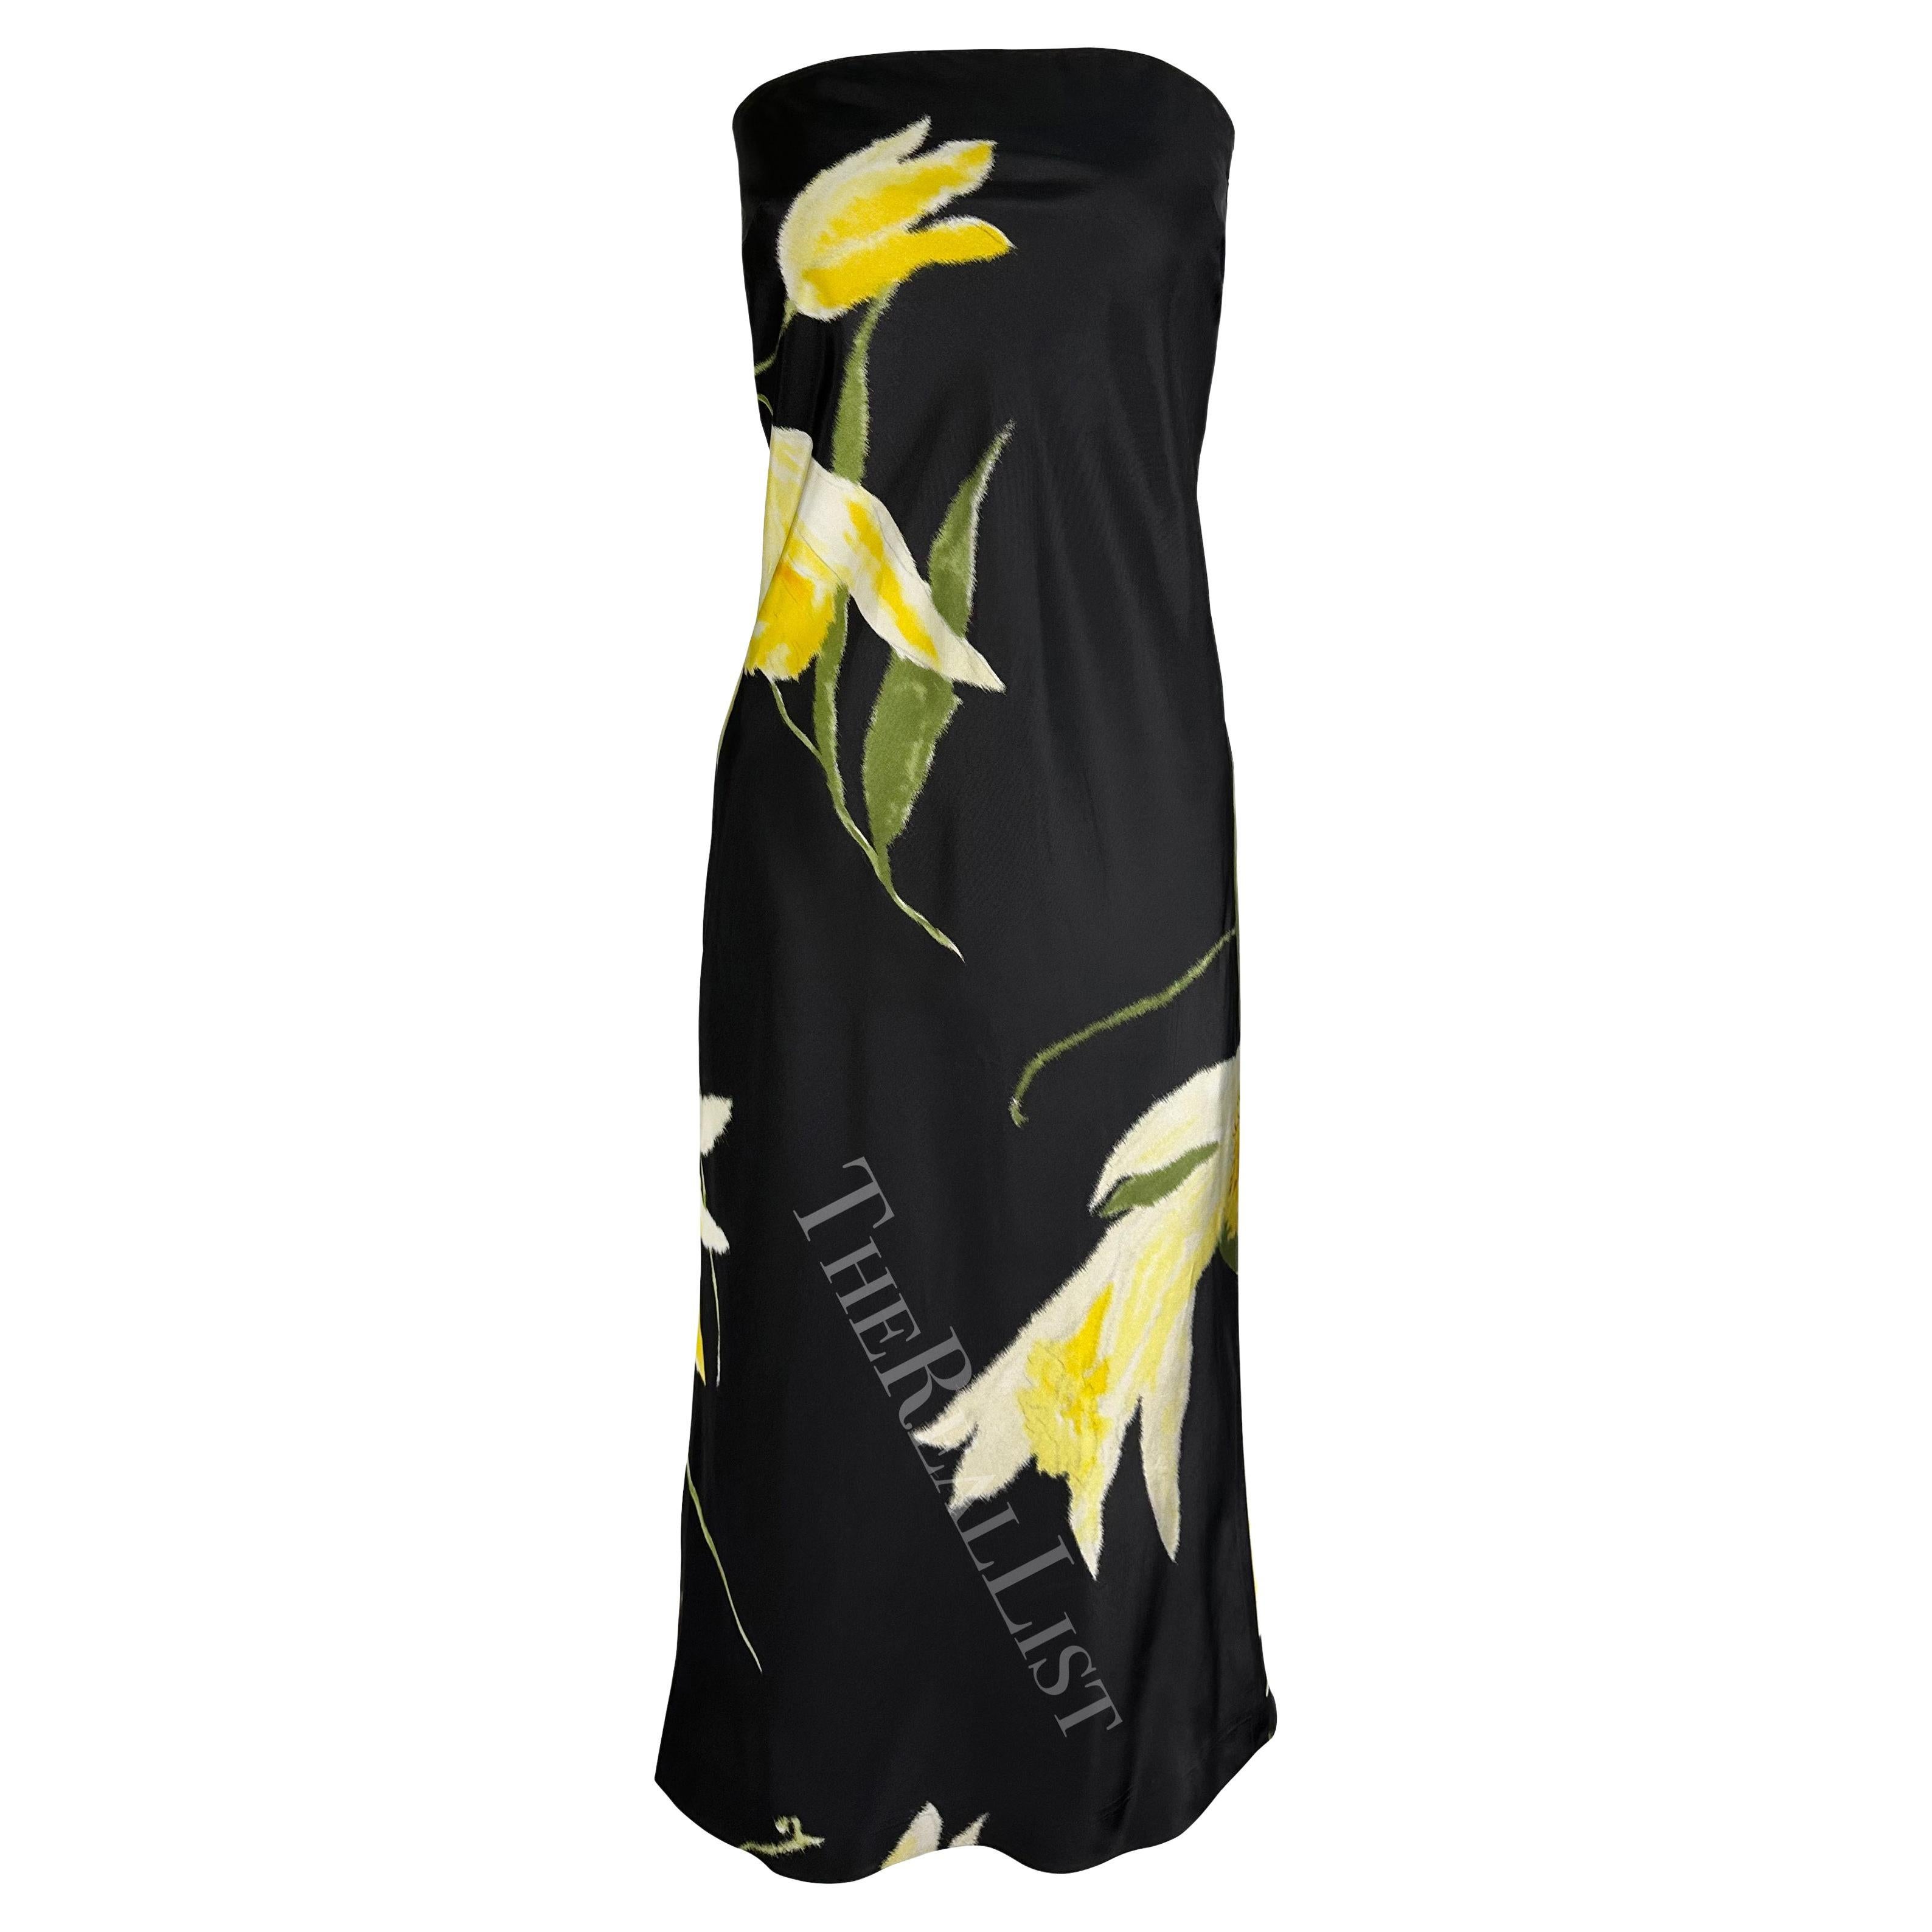 S/S 2000 Ralph Lauren Runway Black Yellow Floral Strapless Cocktail Dress For Sale